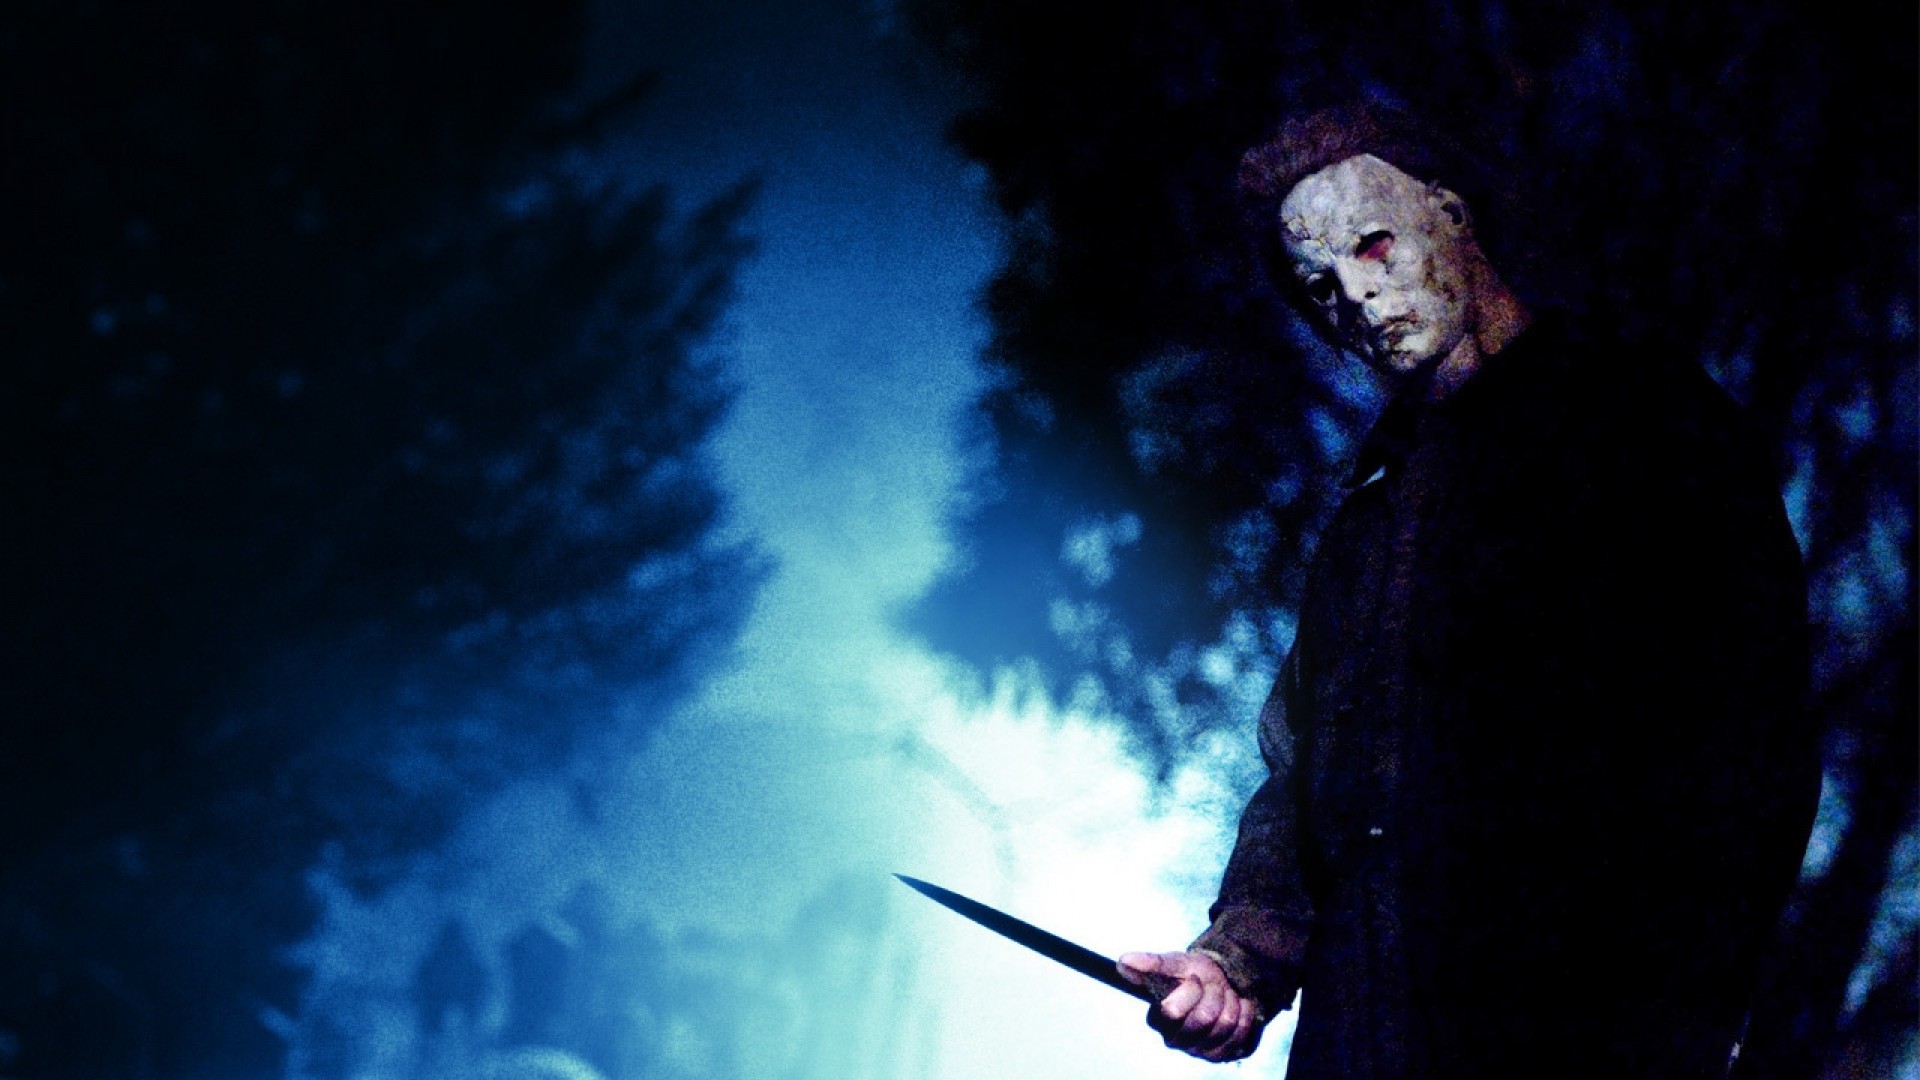 HD Horror Wallpapers 1080p (61+ images)